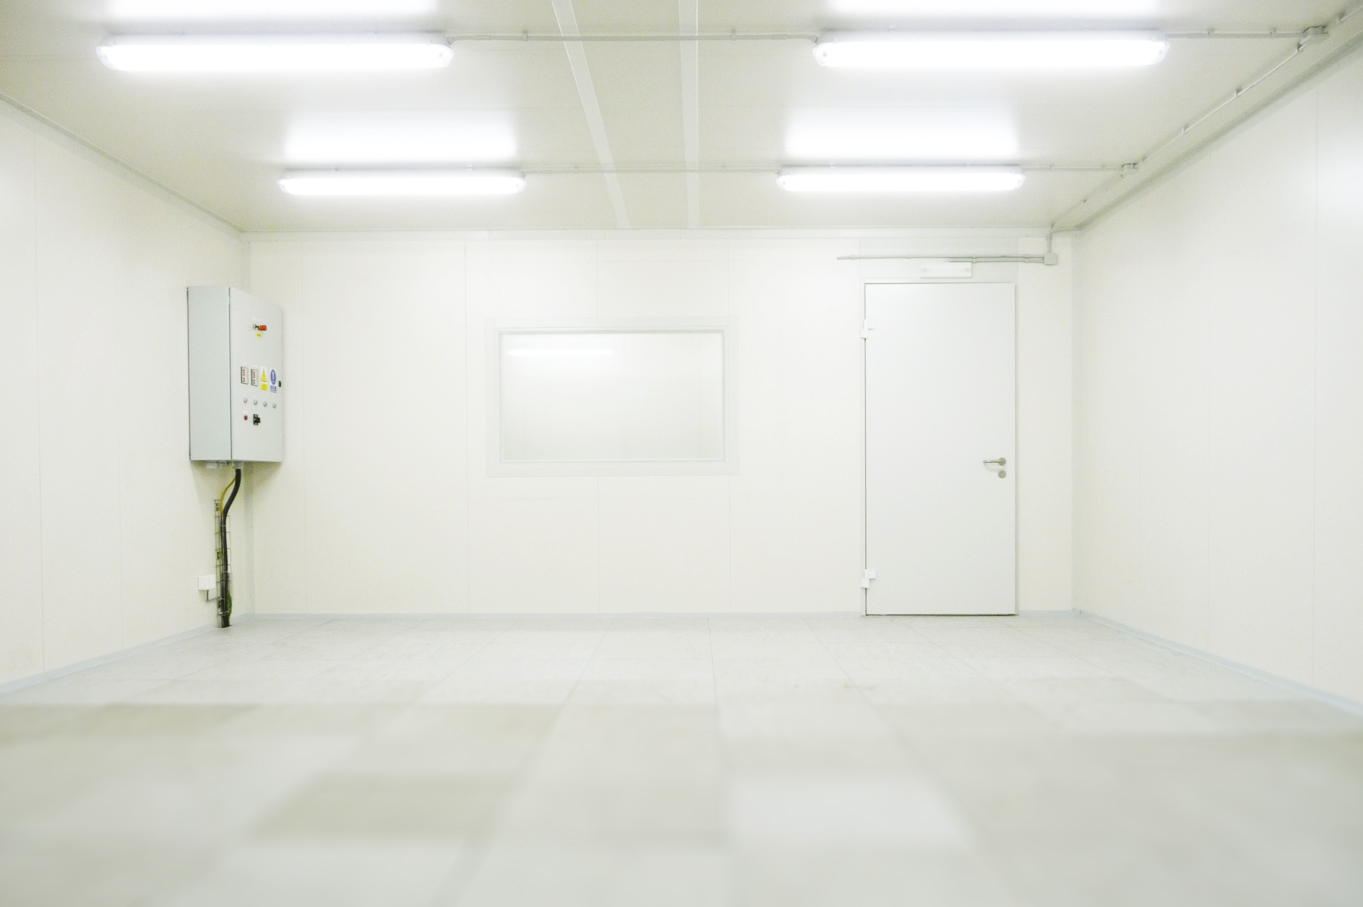 Clean Rooms & Medical device manufacturing